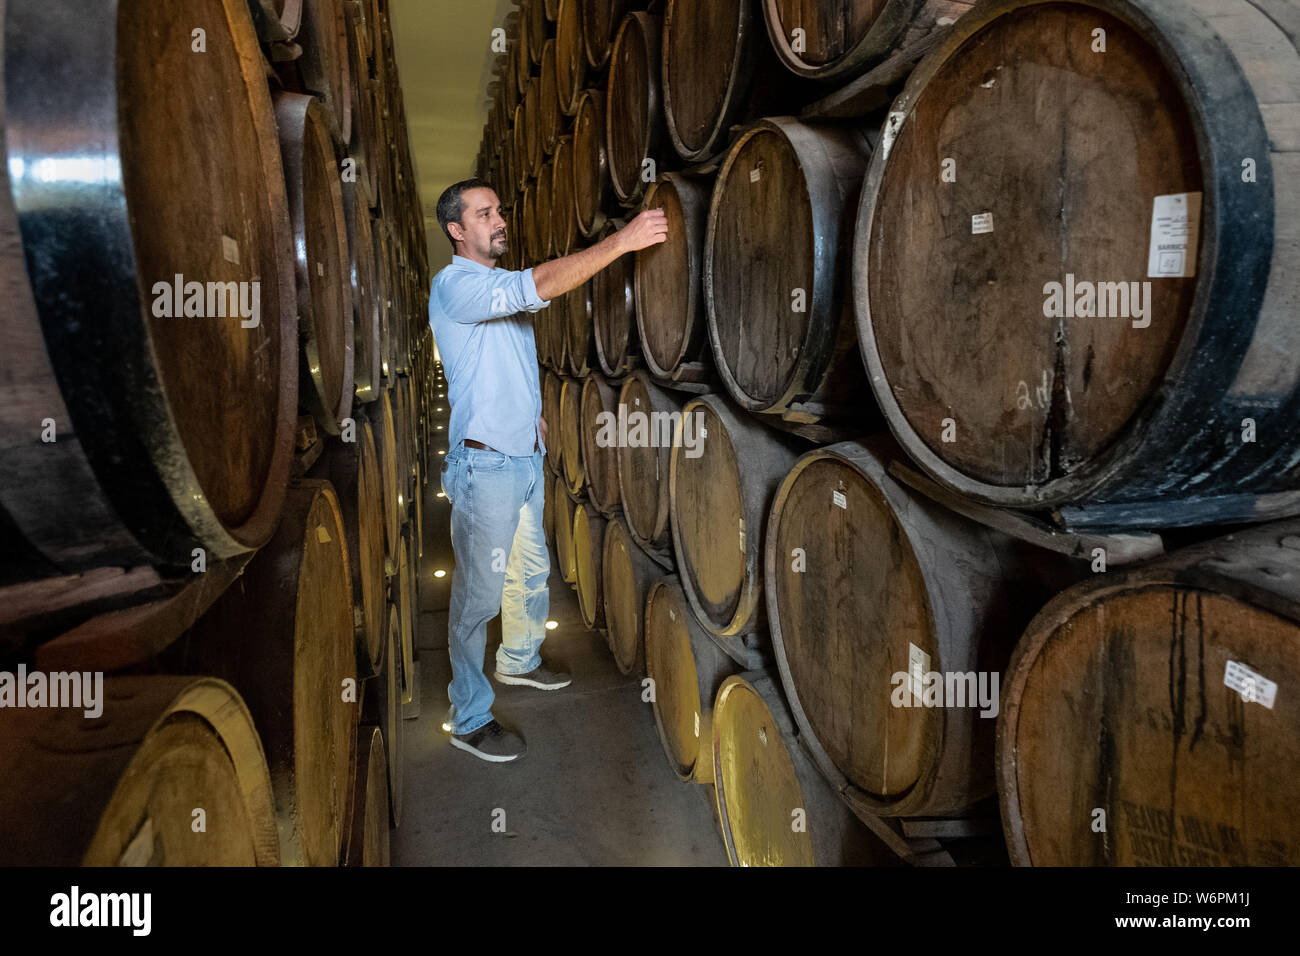 Beto Hernandez, grandson of the founder, inspects tequila aging in the barrel room at the Casa Siete Leguas, El Centenario tequila distillery in Atotonilco de Alto, Jalisco, Mexico. The Seven Leagues tequila distillery is the oldest family owned distillery producing authentic handcrafted tequila using traditional methods. Stock Photo